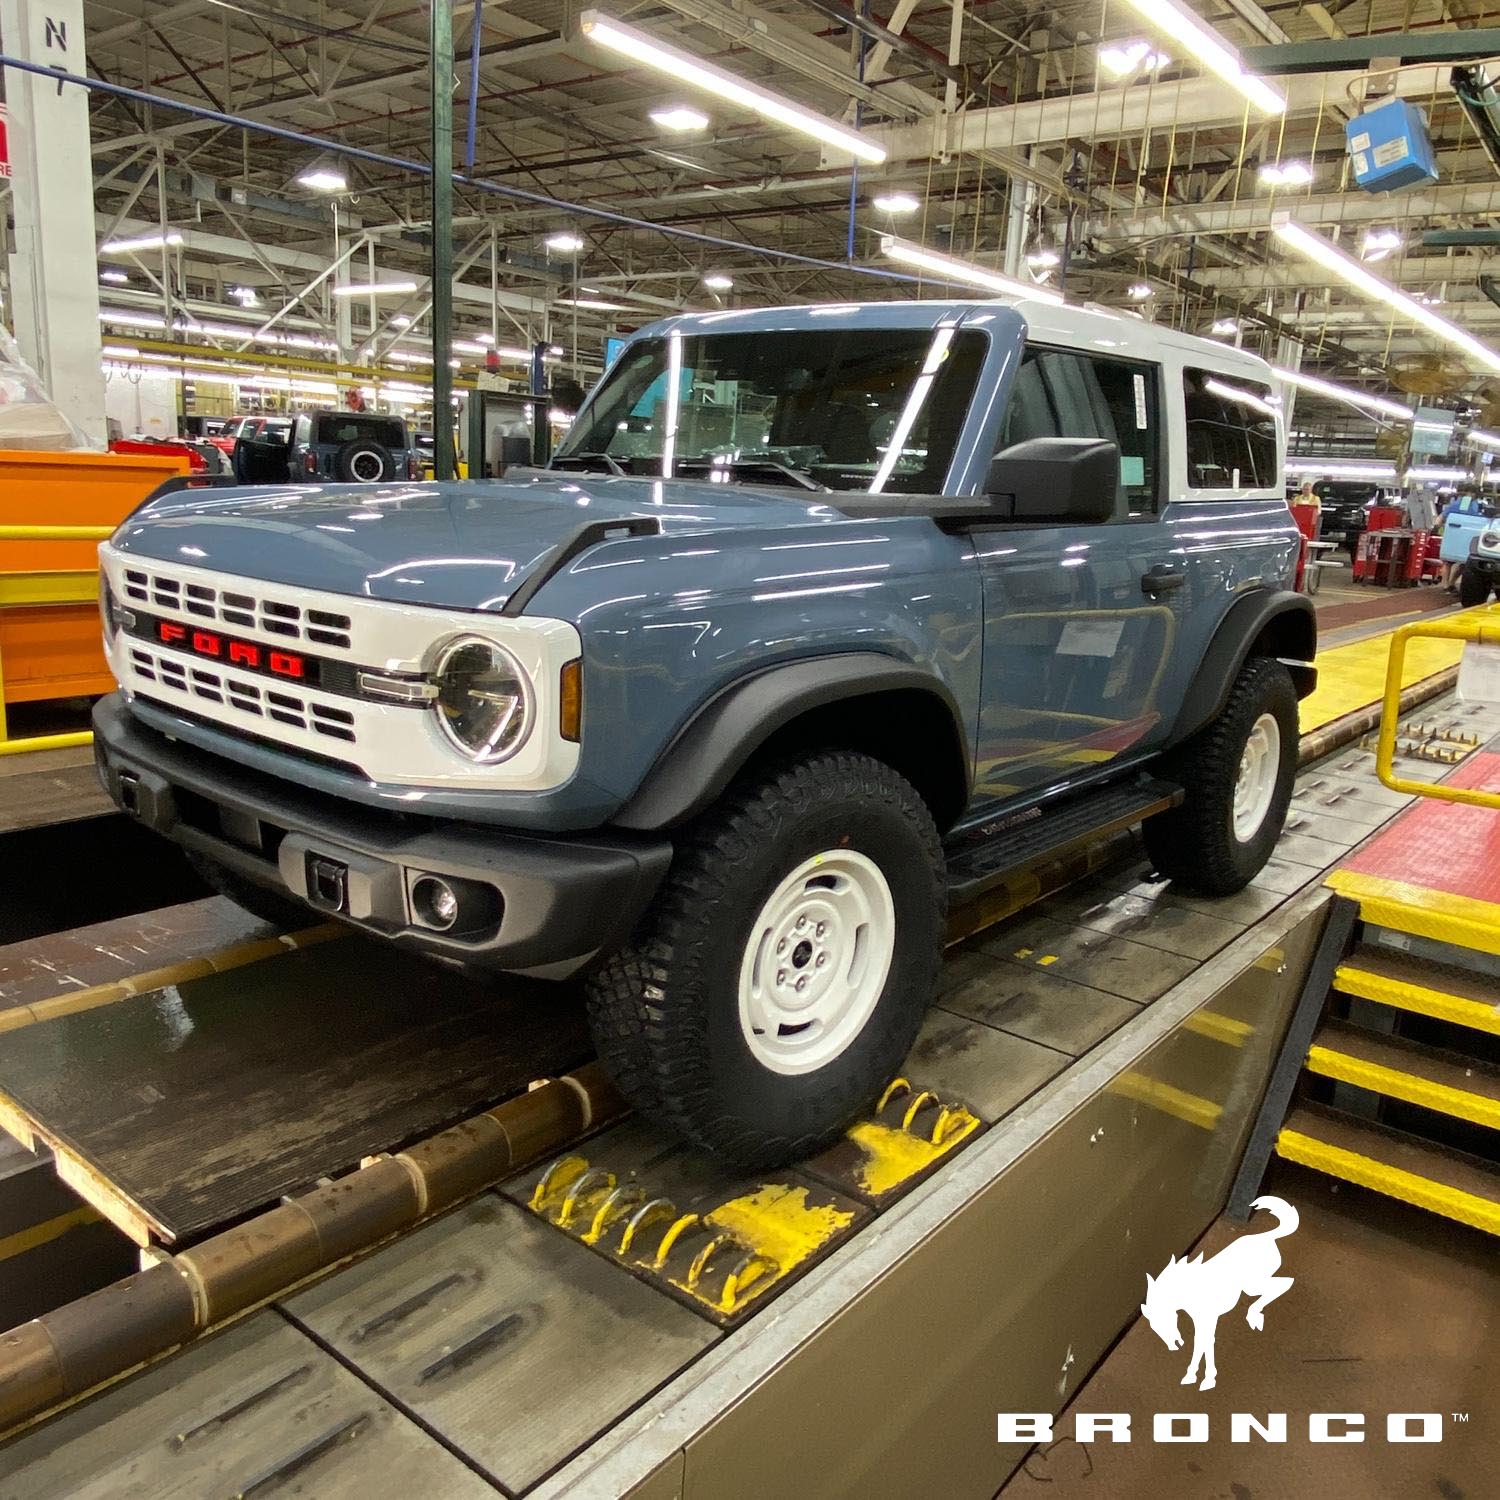 Ford Bronco Production photos? image (1)